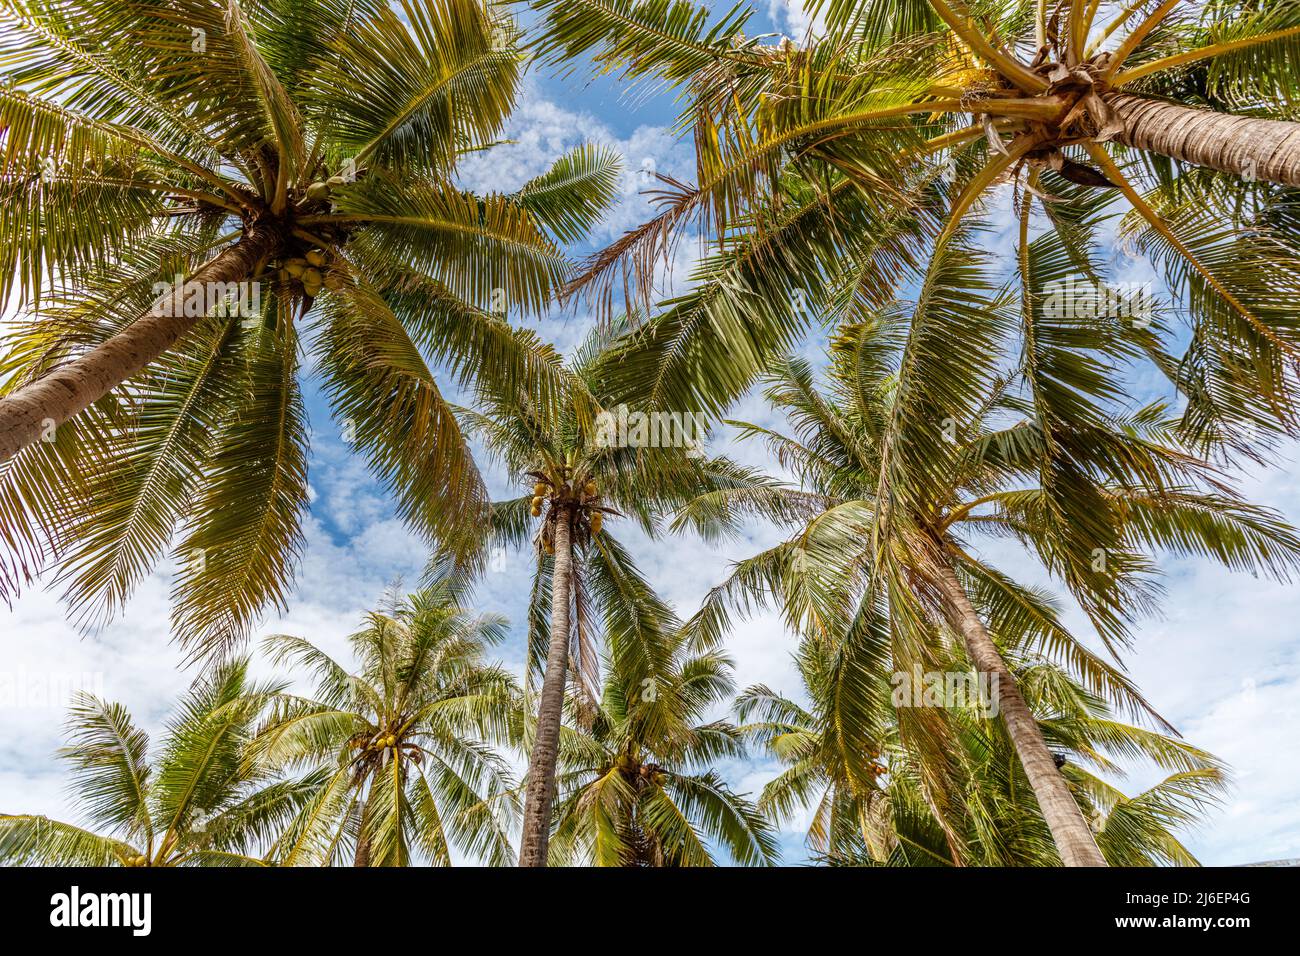 Tops of palm trees with blue sky at the background at Nemberala Beach, Rote Island, East Nusa Tenggara province, Indonesia. Stock Photo